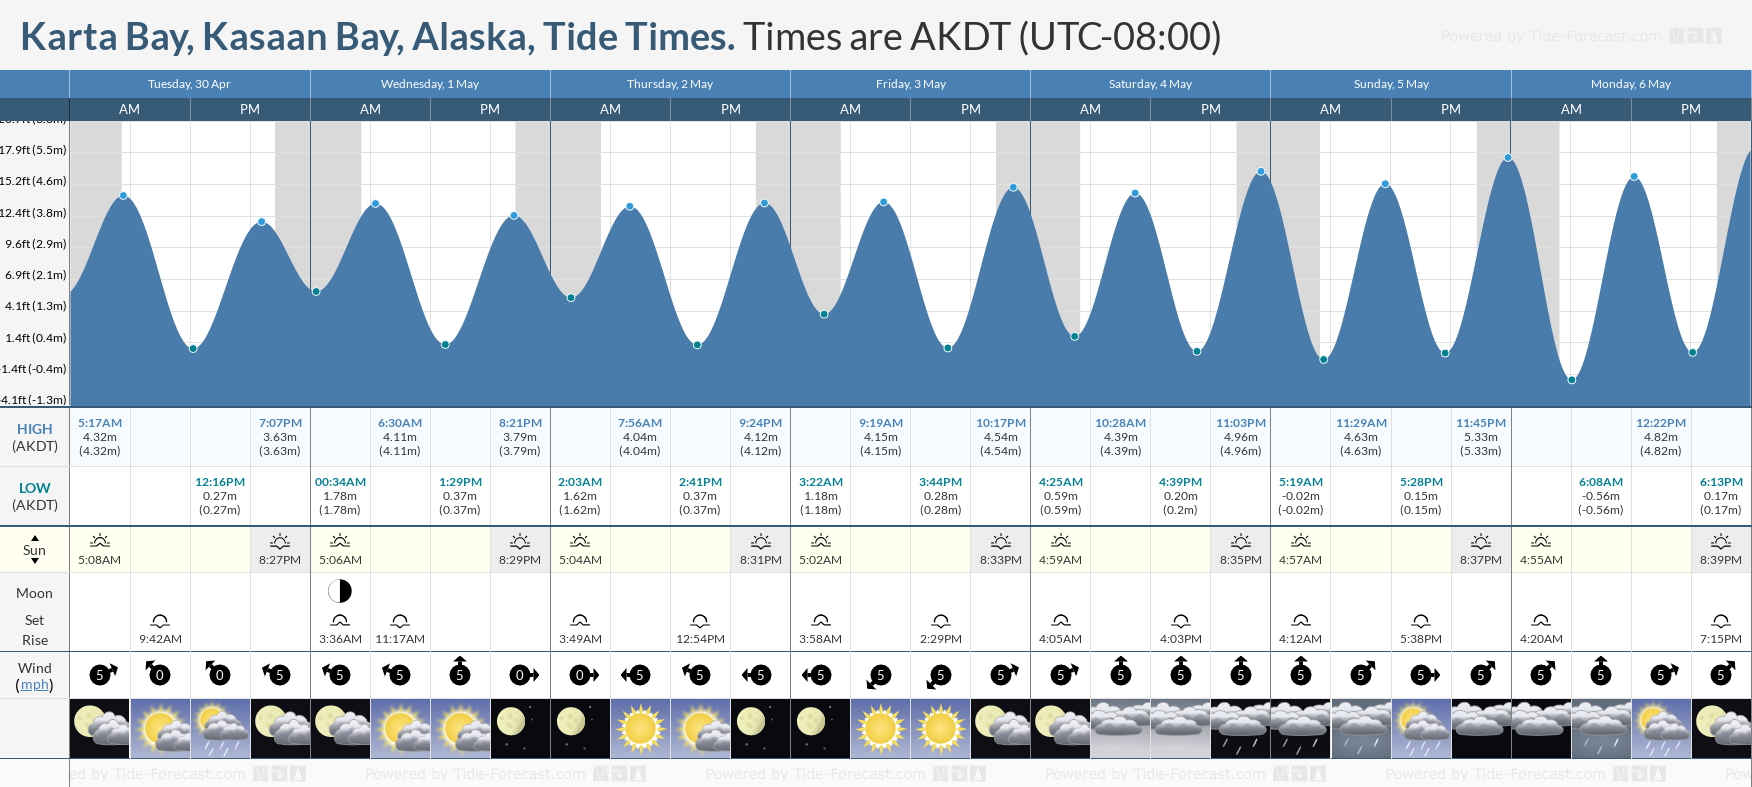 Karta Bay, Kasaan Bay, Alaska Tide Chart including high and low tide tide times for the next 7 days